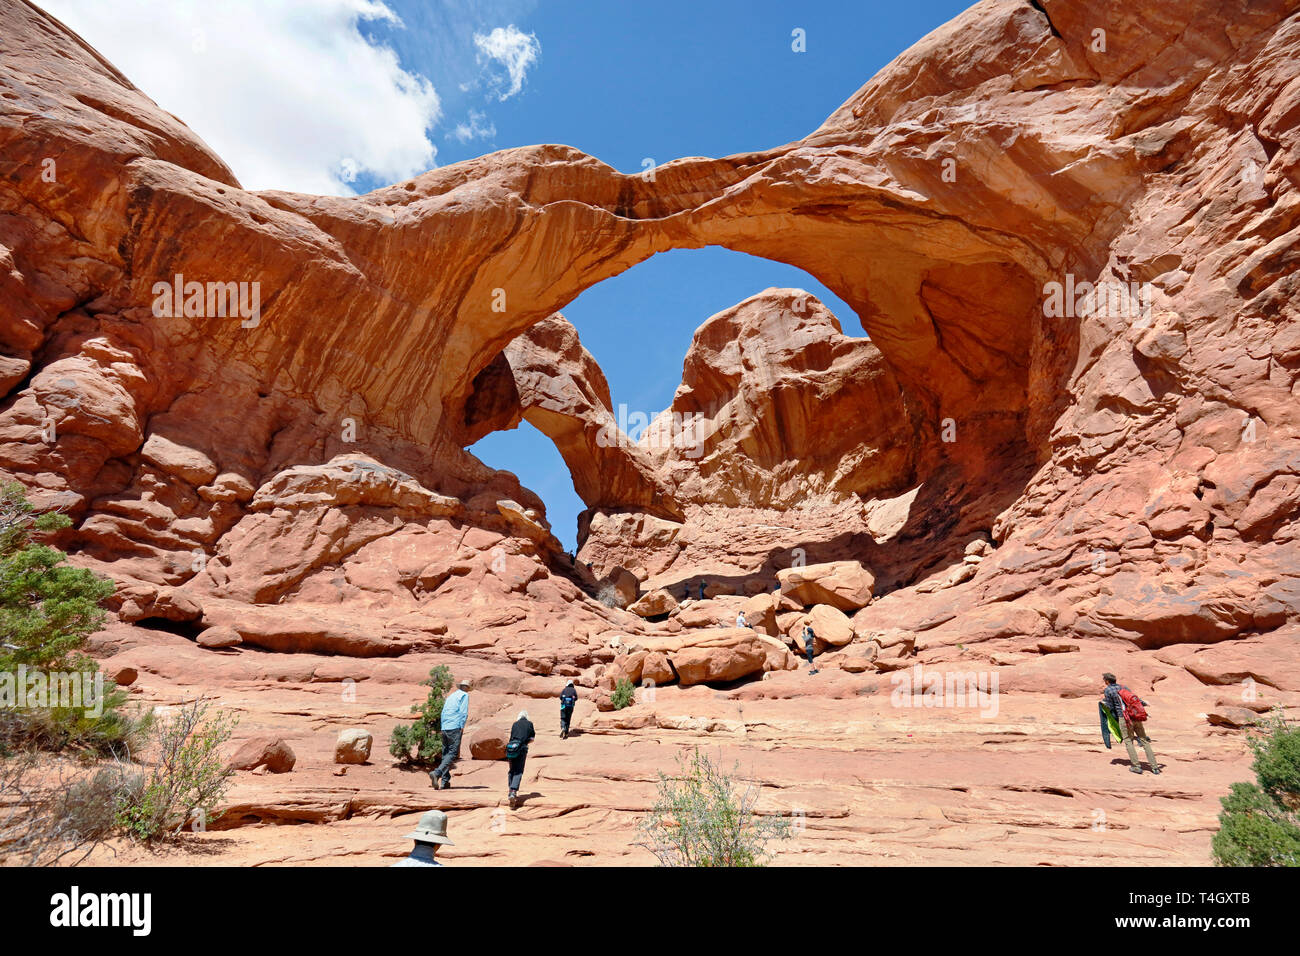 Visitors hike the sandy trail to ascend the awe inspiring Double Arch at the Arches Nation Park in Utah, USA. Stock Photo